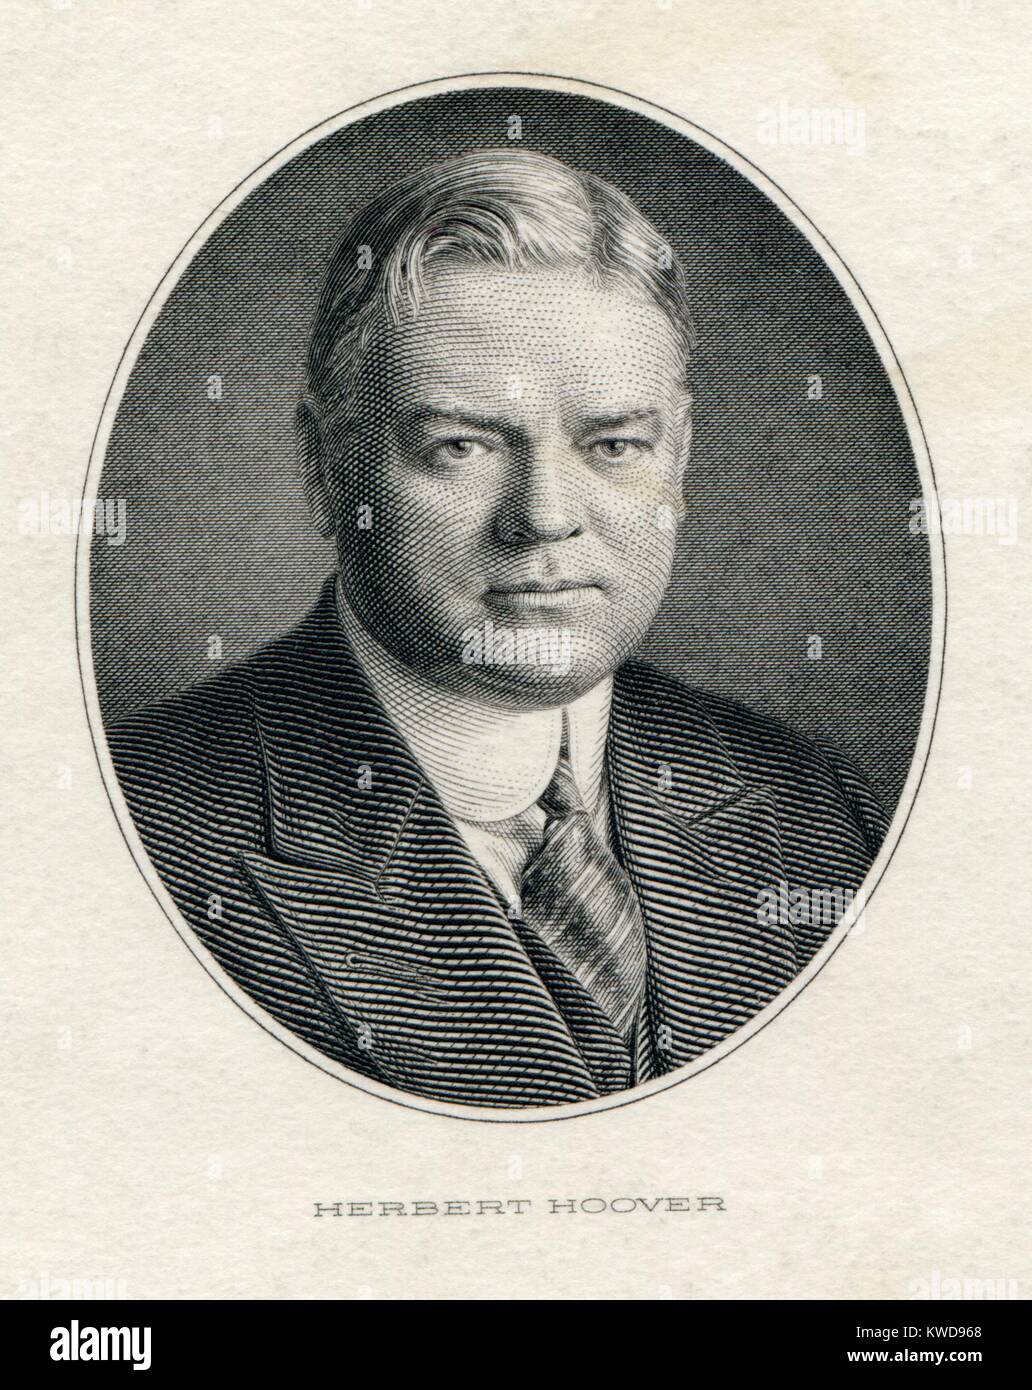 President Herbert Hoover in his official portrait engraving, ca. 1929. (BSLOC_2015_16_46) Stock Photo